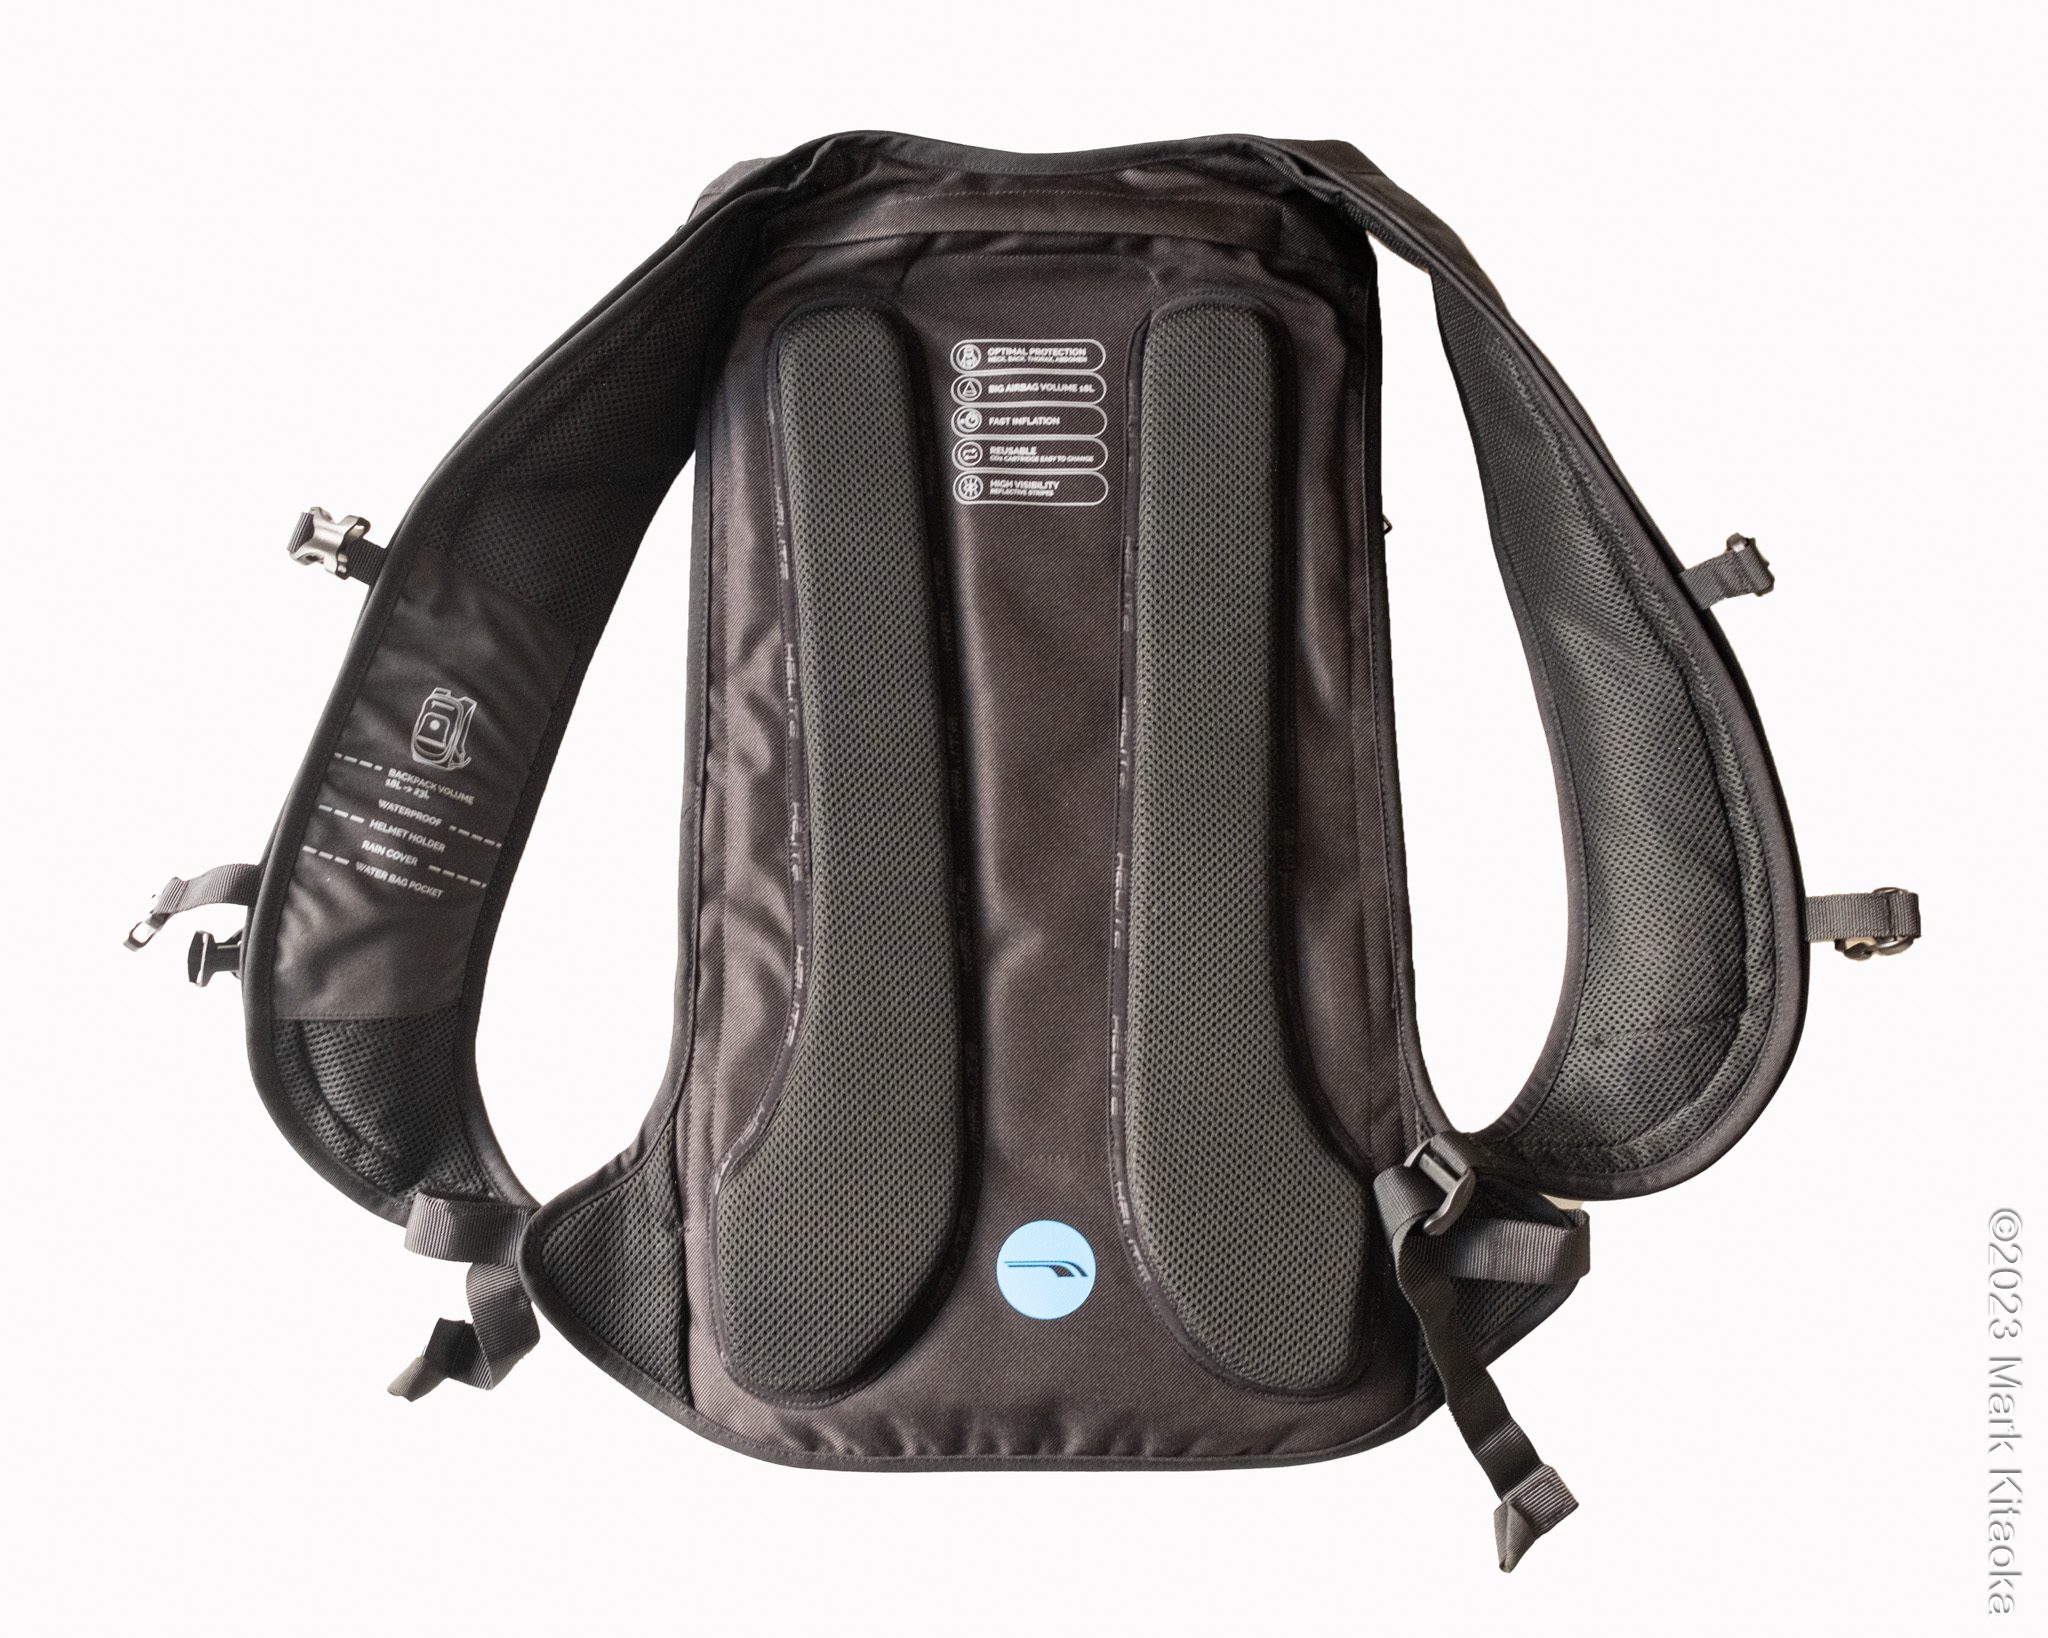 Back view of the H-MOOV airbag backpack